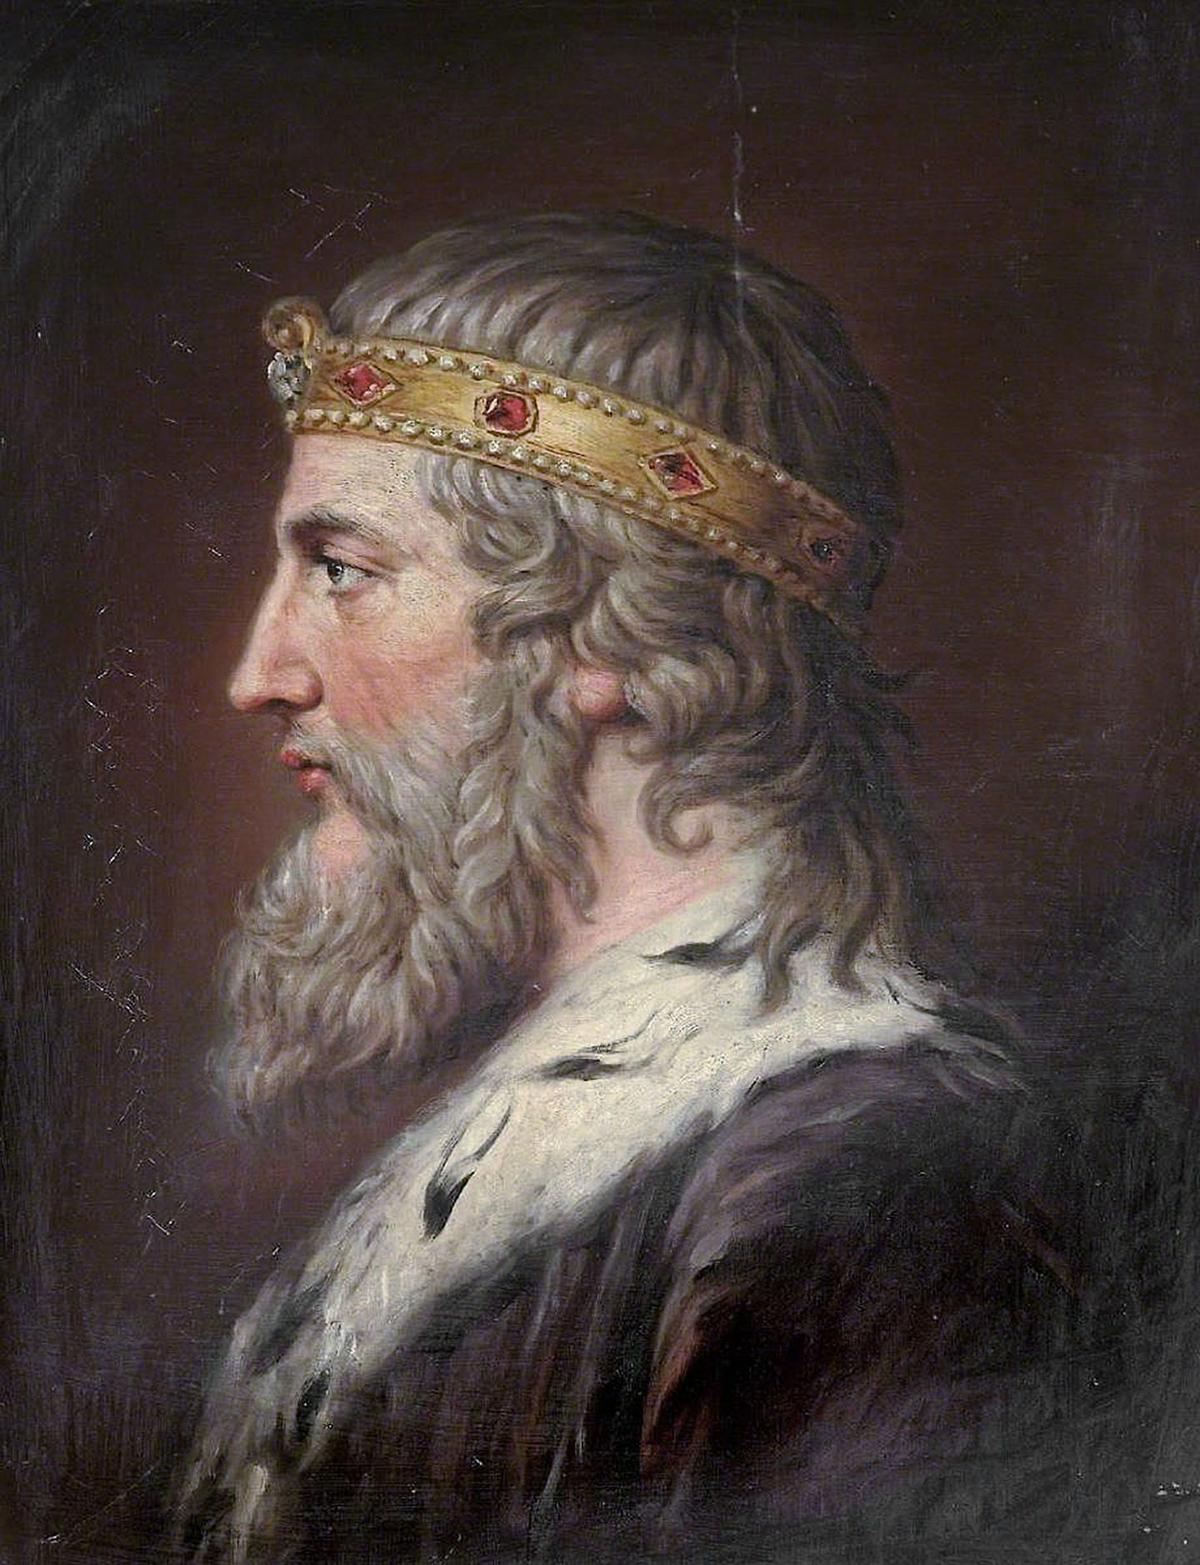 A portrait of Alfred the Great, 1790, by Samuel Woodforde. (Public Domain)